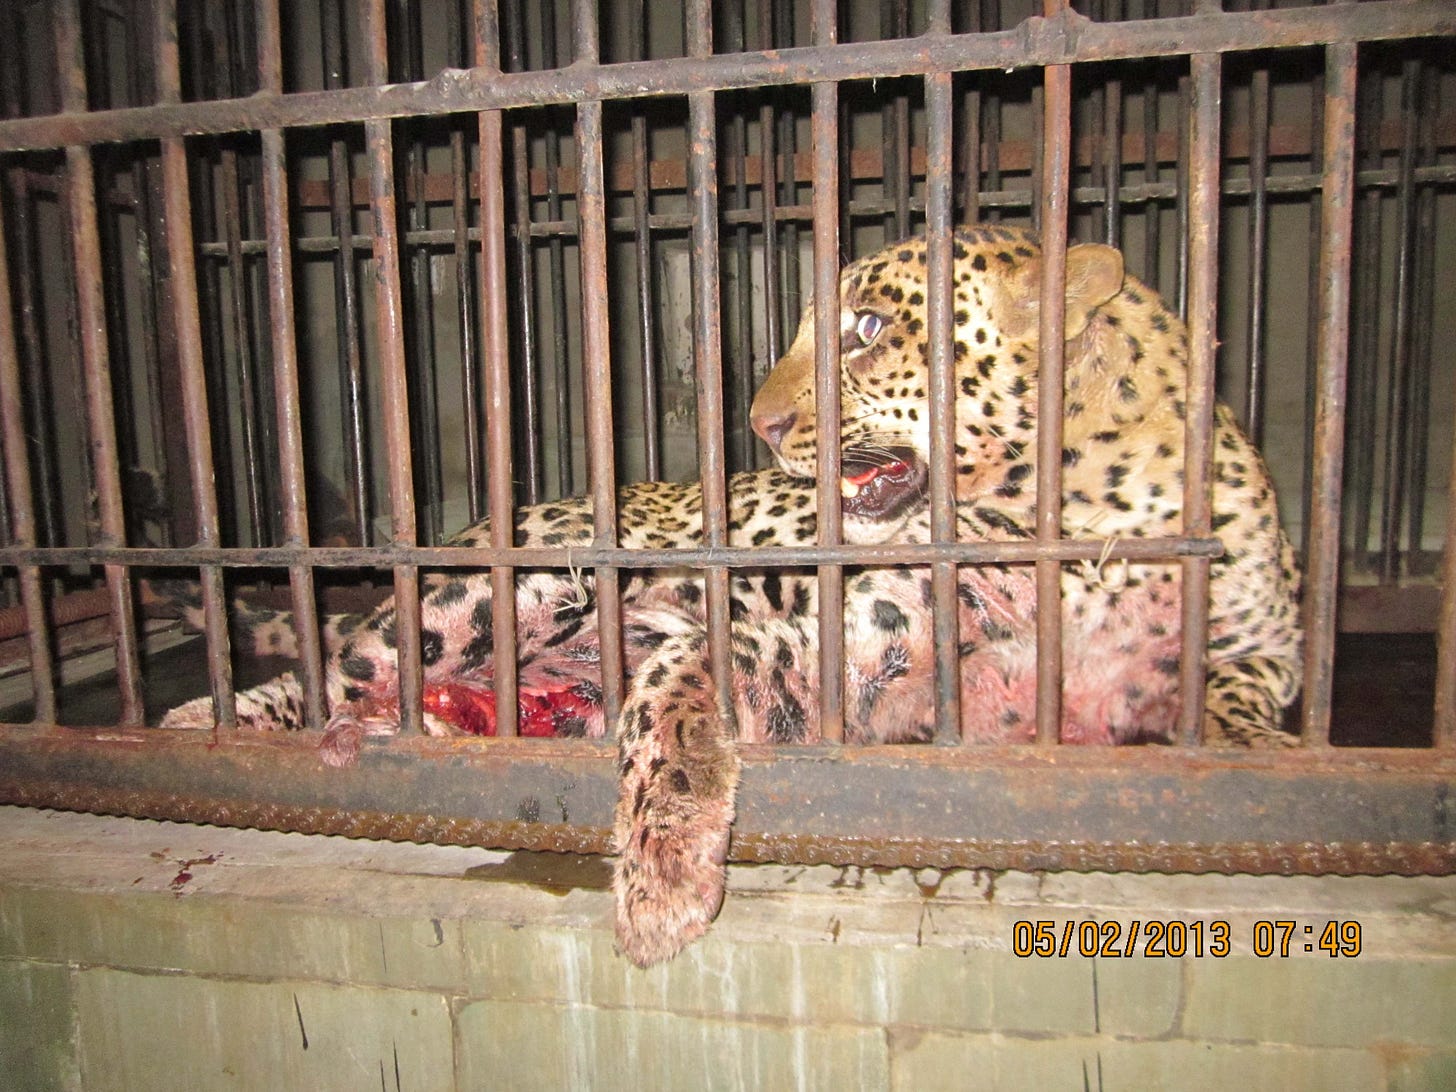 Injured leopard rescued by Wildlife SOS on 5 Feb 2013 under treatment at Delhi Zoo